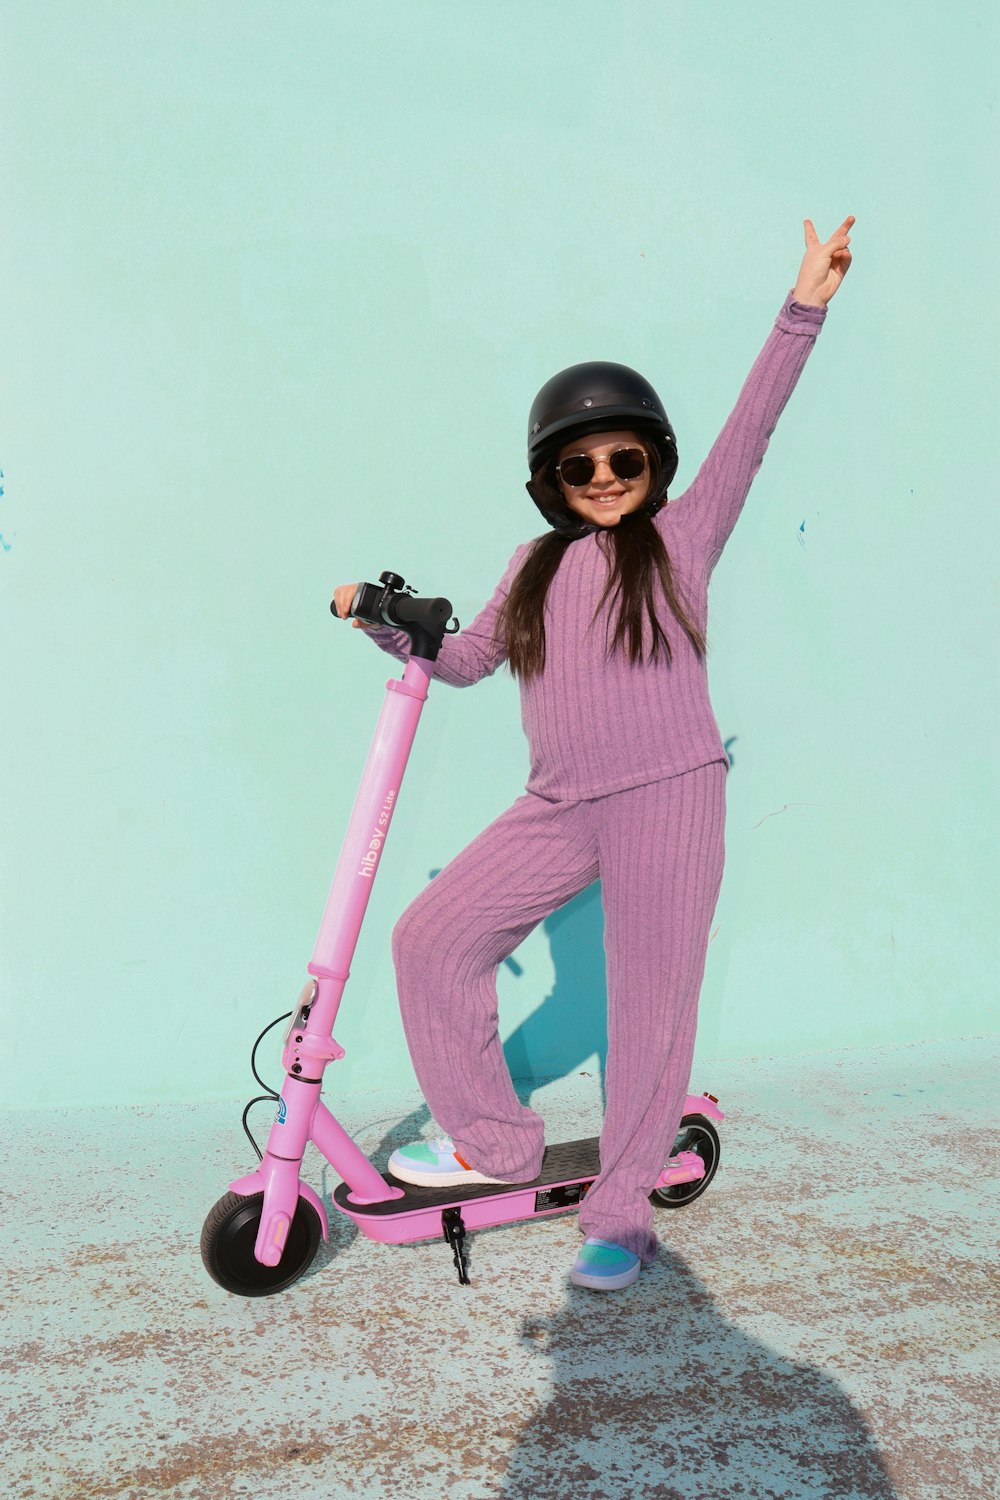 a woman in a pink outfit riding a pink scooter